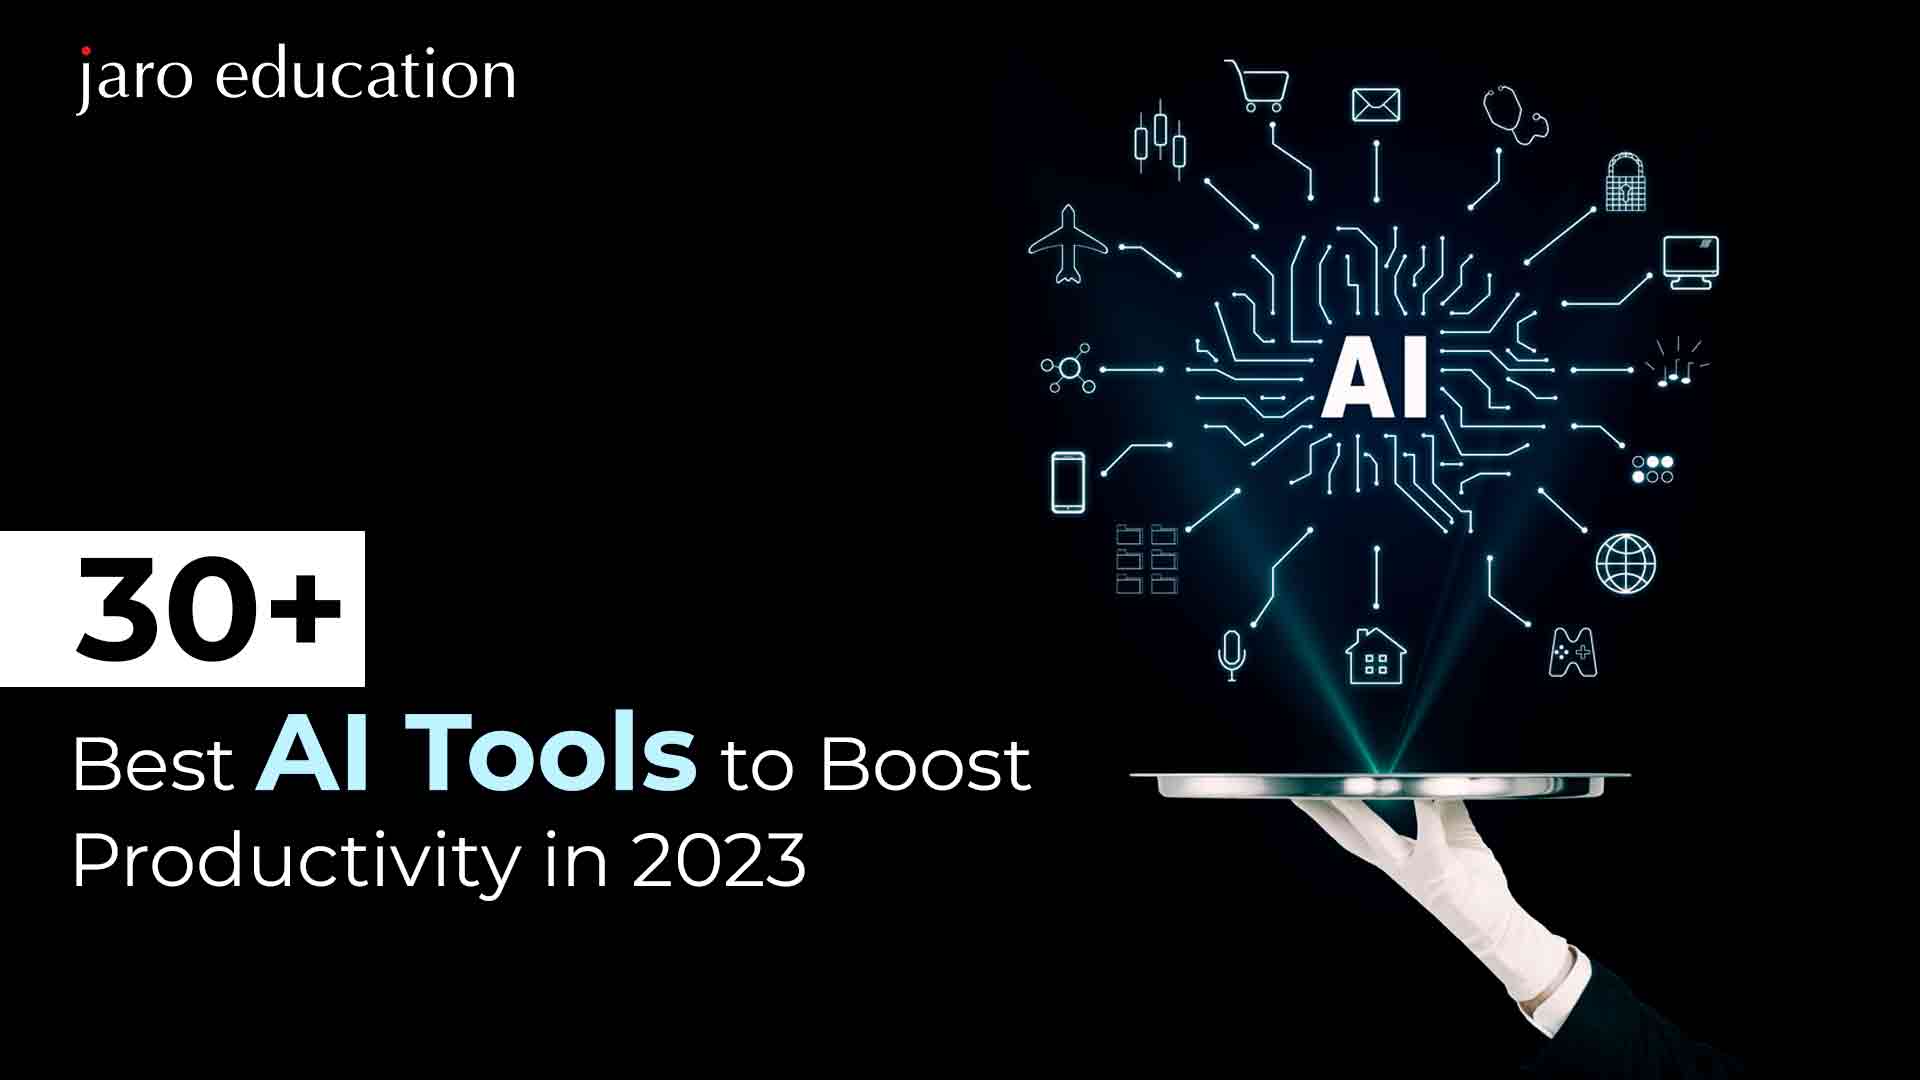 30+-Best-AI-Tools-to-Boost-Productivity-in-2023